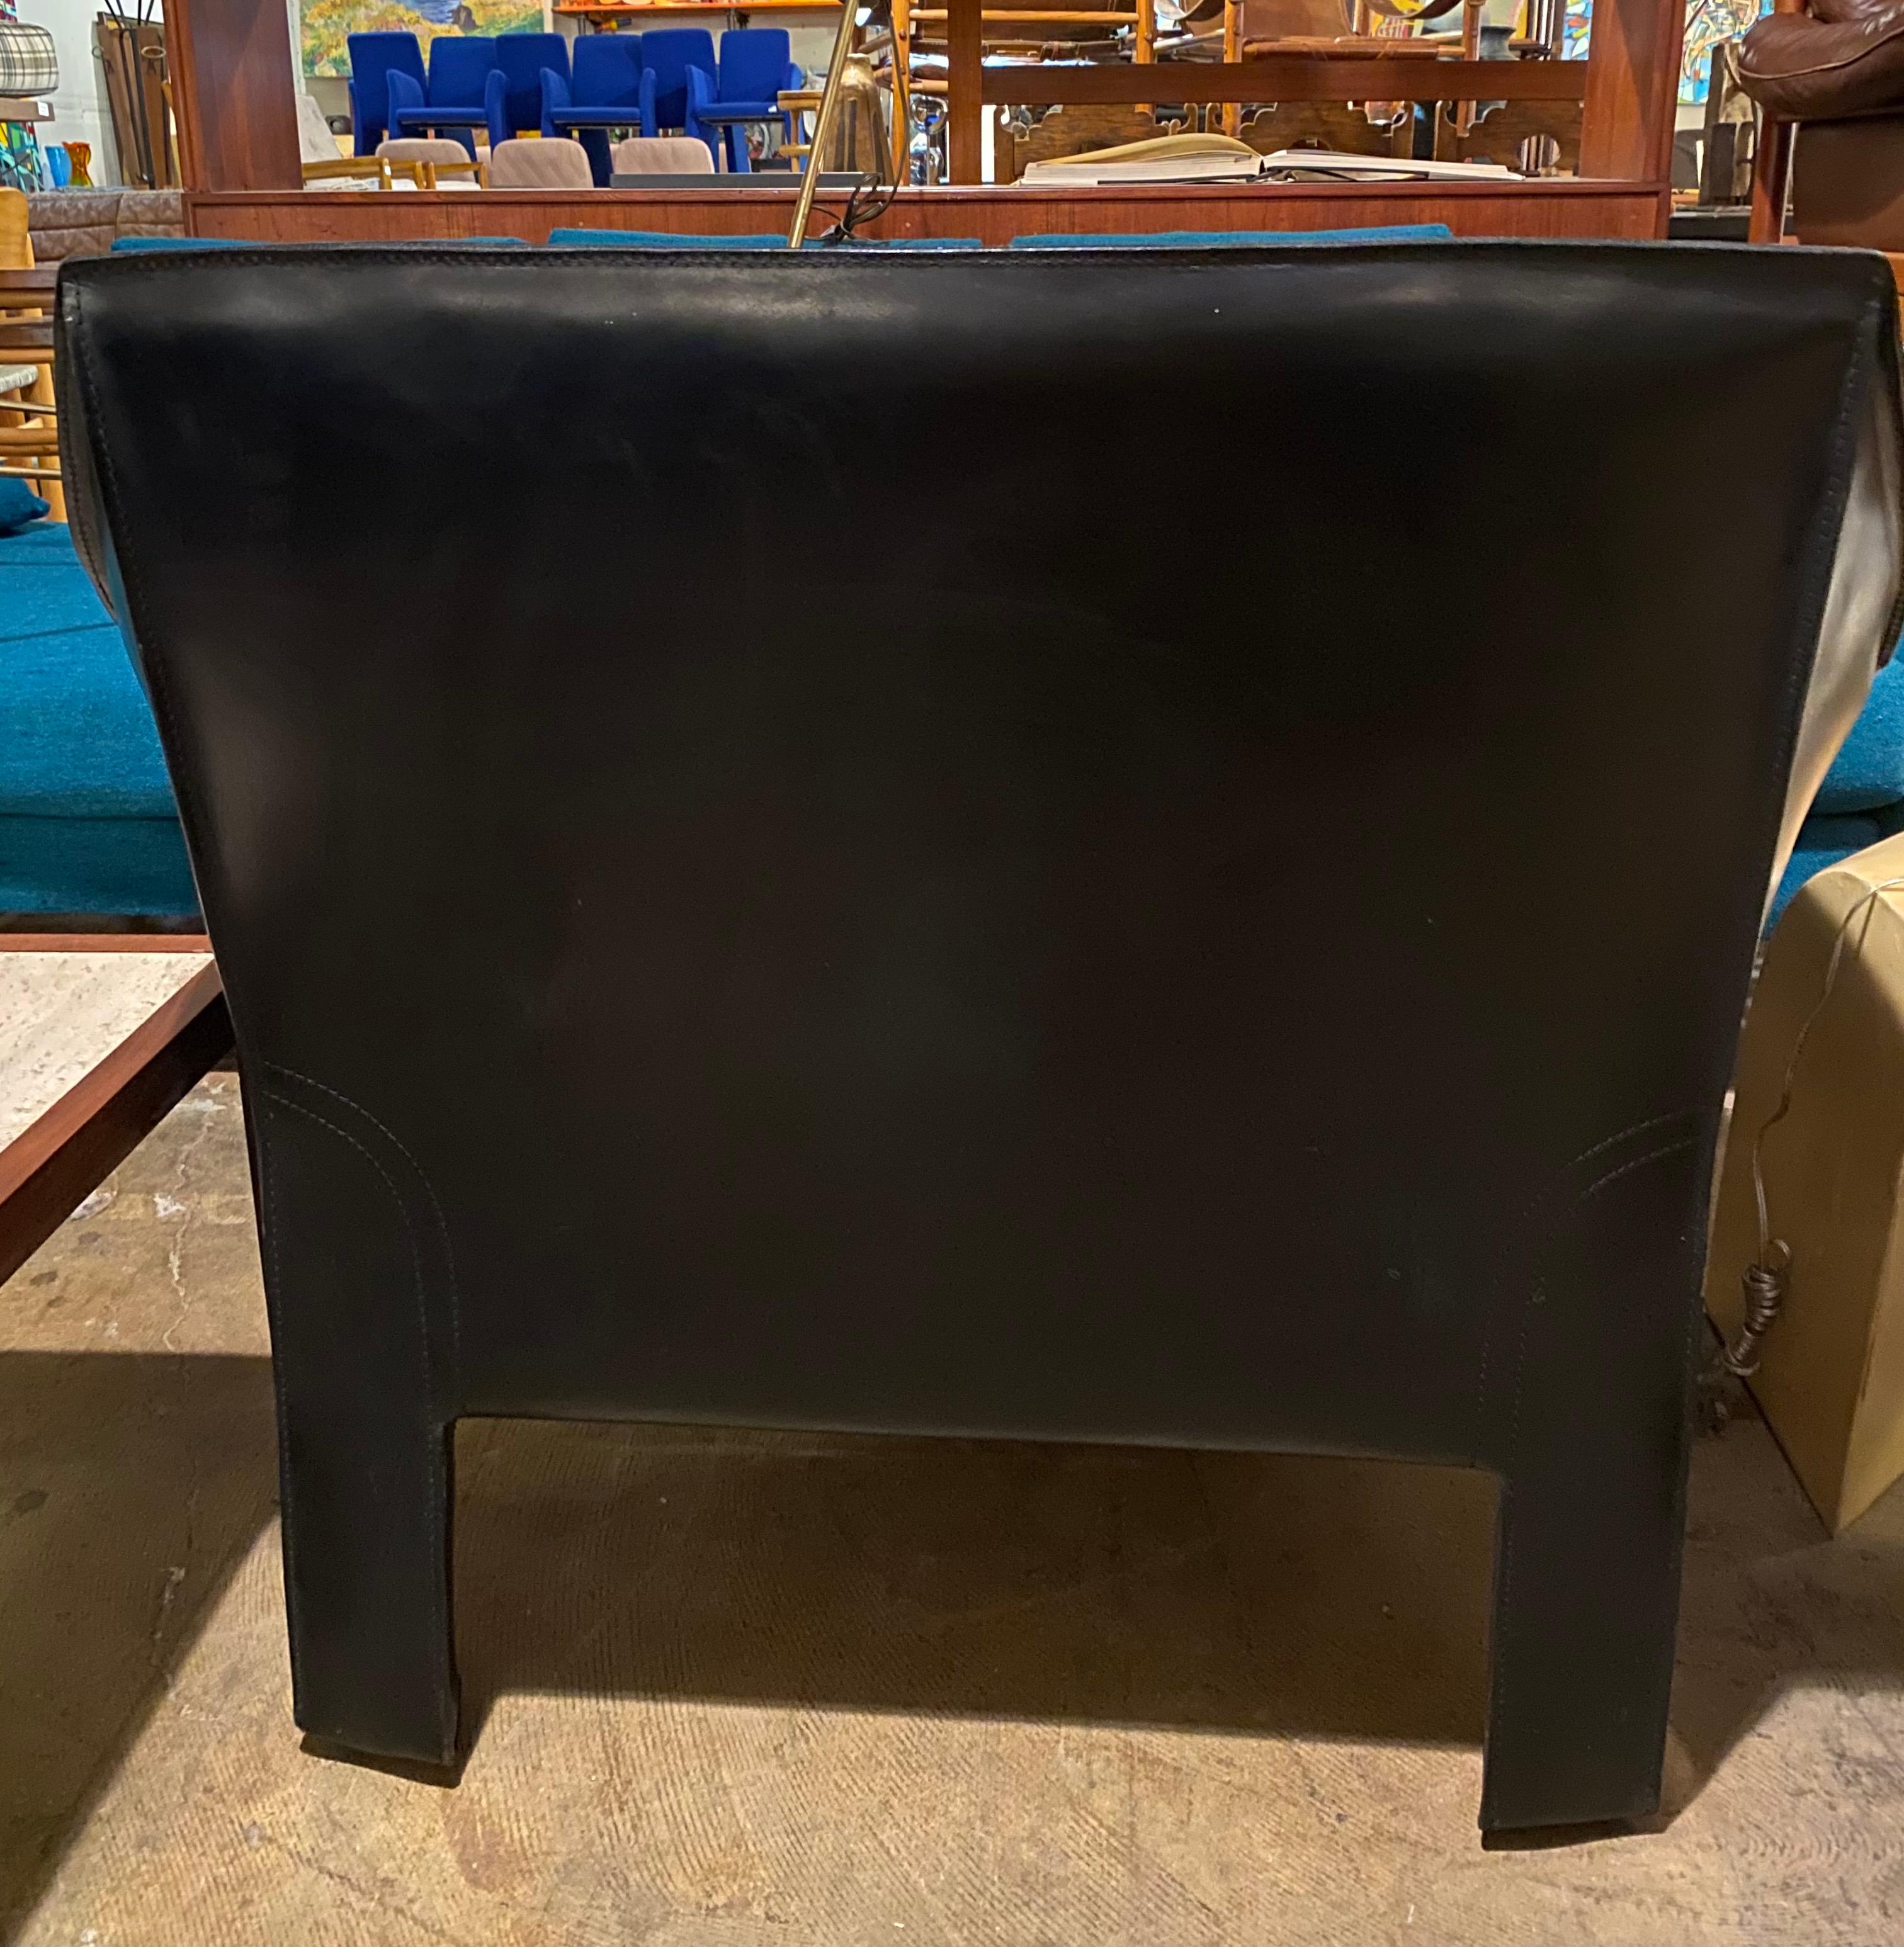 Beautiful vintage Mario Bellini for Cassina Cab 415 leather chair in black. Designed similar to the Cab dining chairs, the lounge club chair is a much larger and deeper version and would make for a stunning piece in any setting. This vintage Cassina